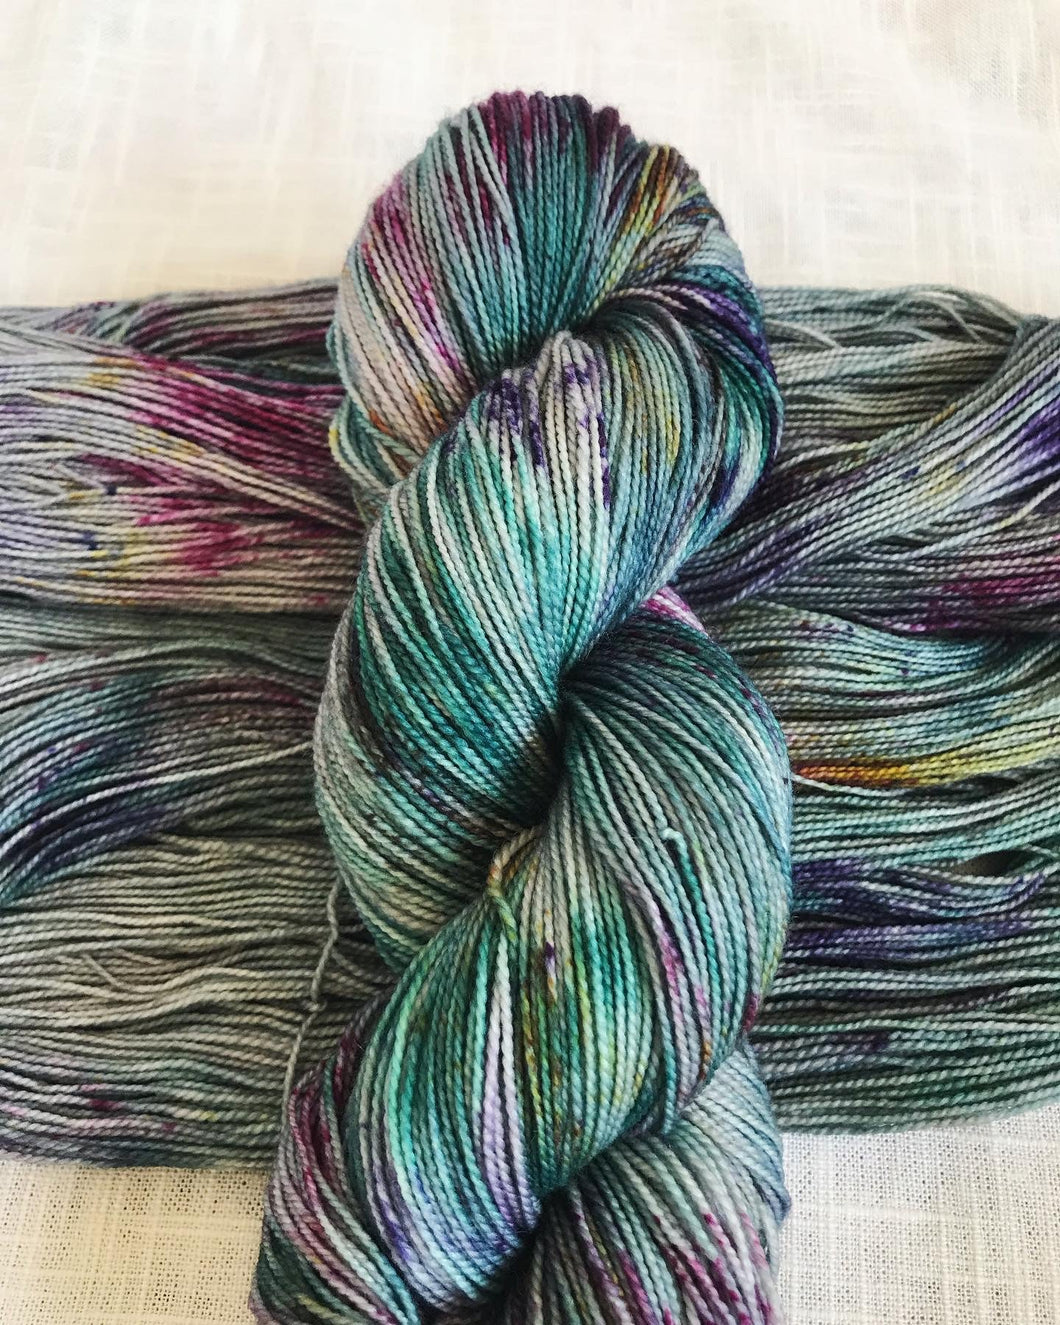 Lunar Reef - In Stock (Worsted)